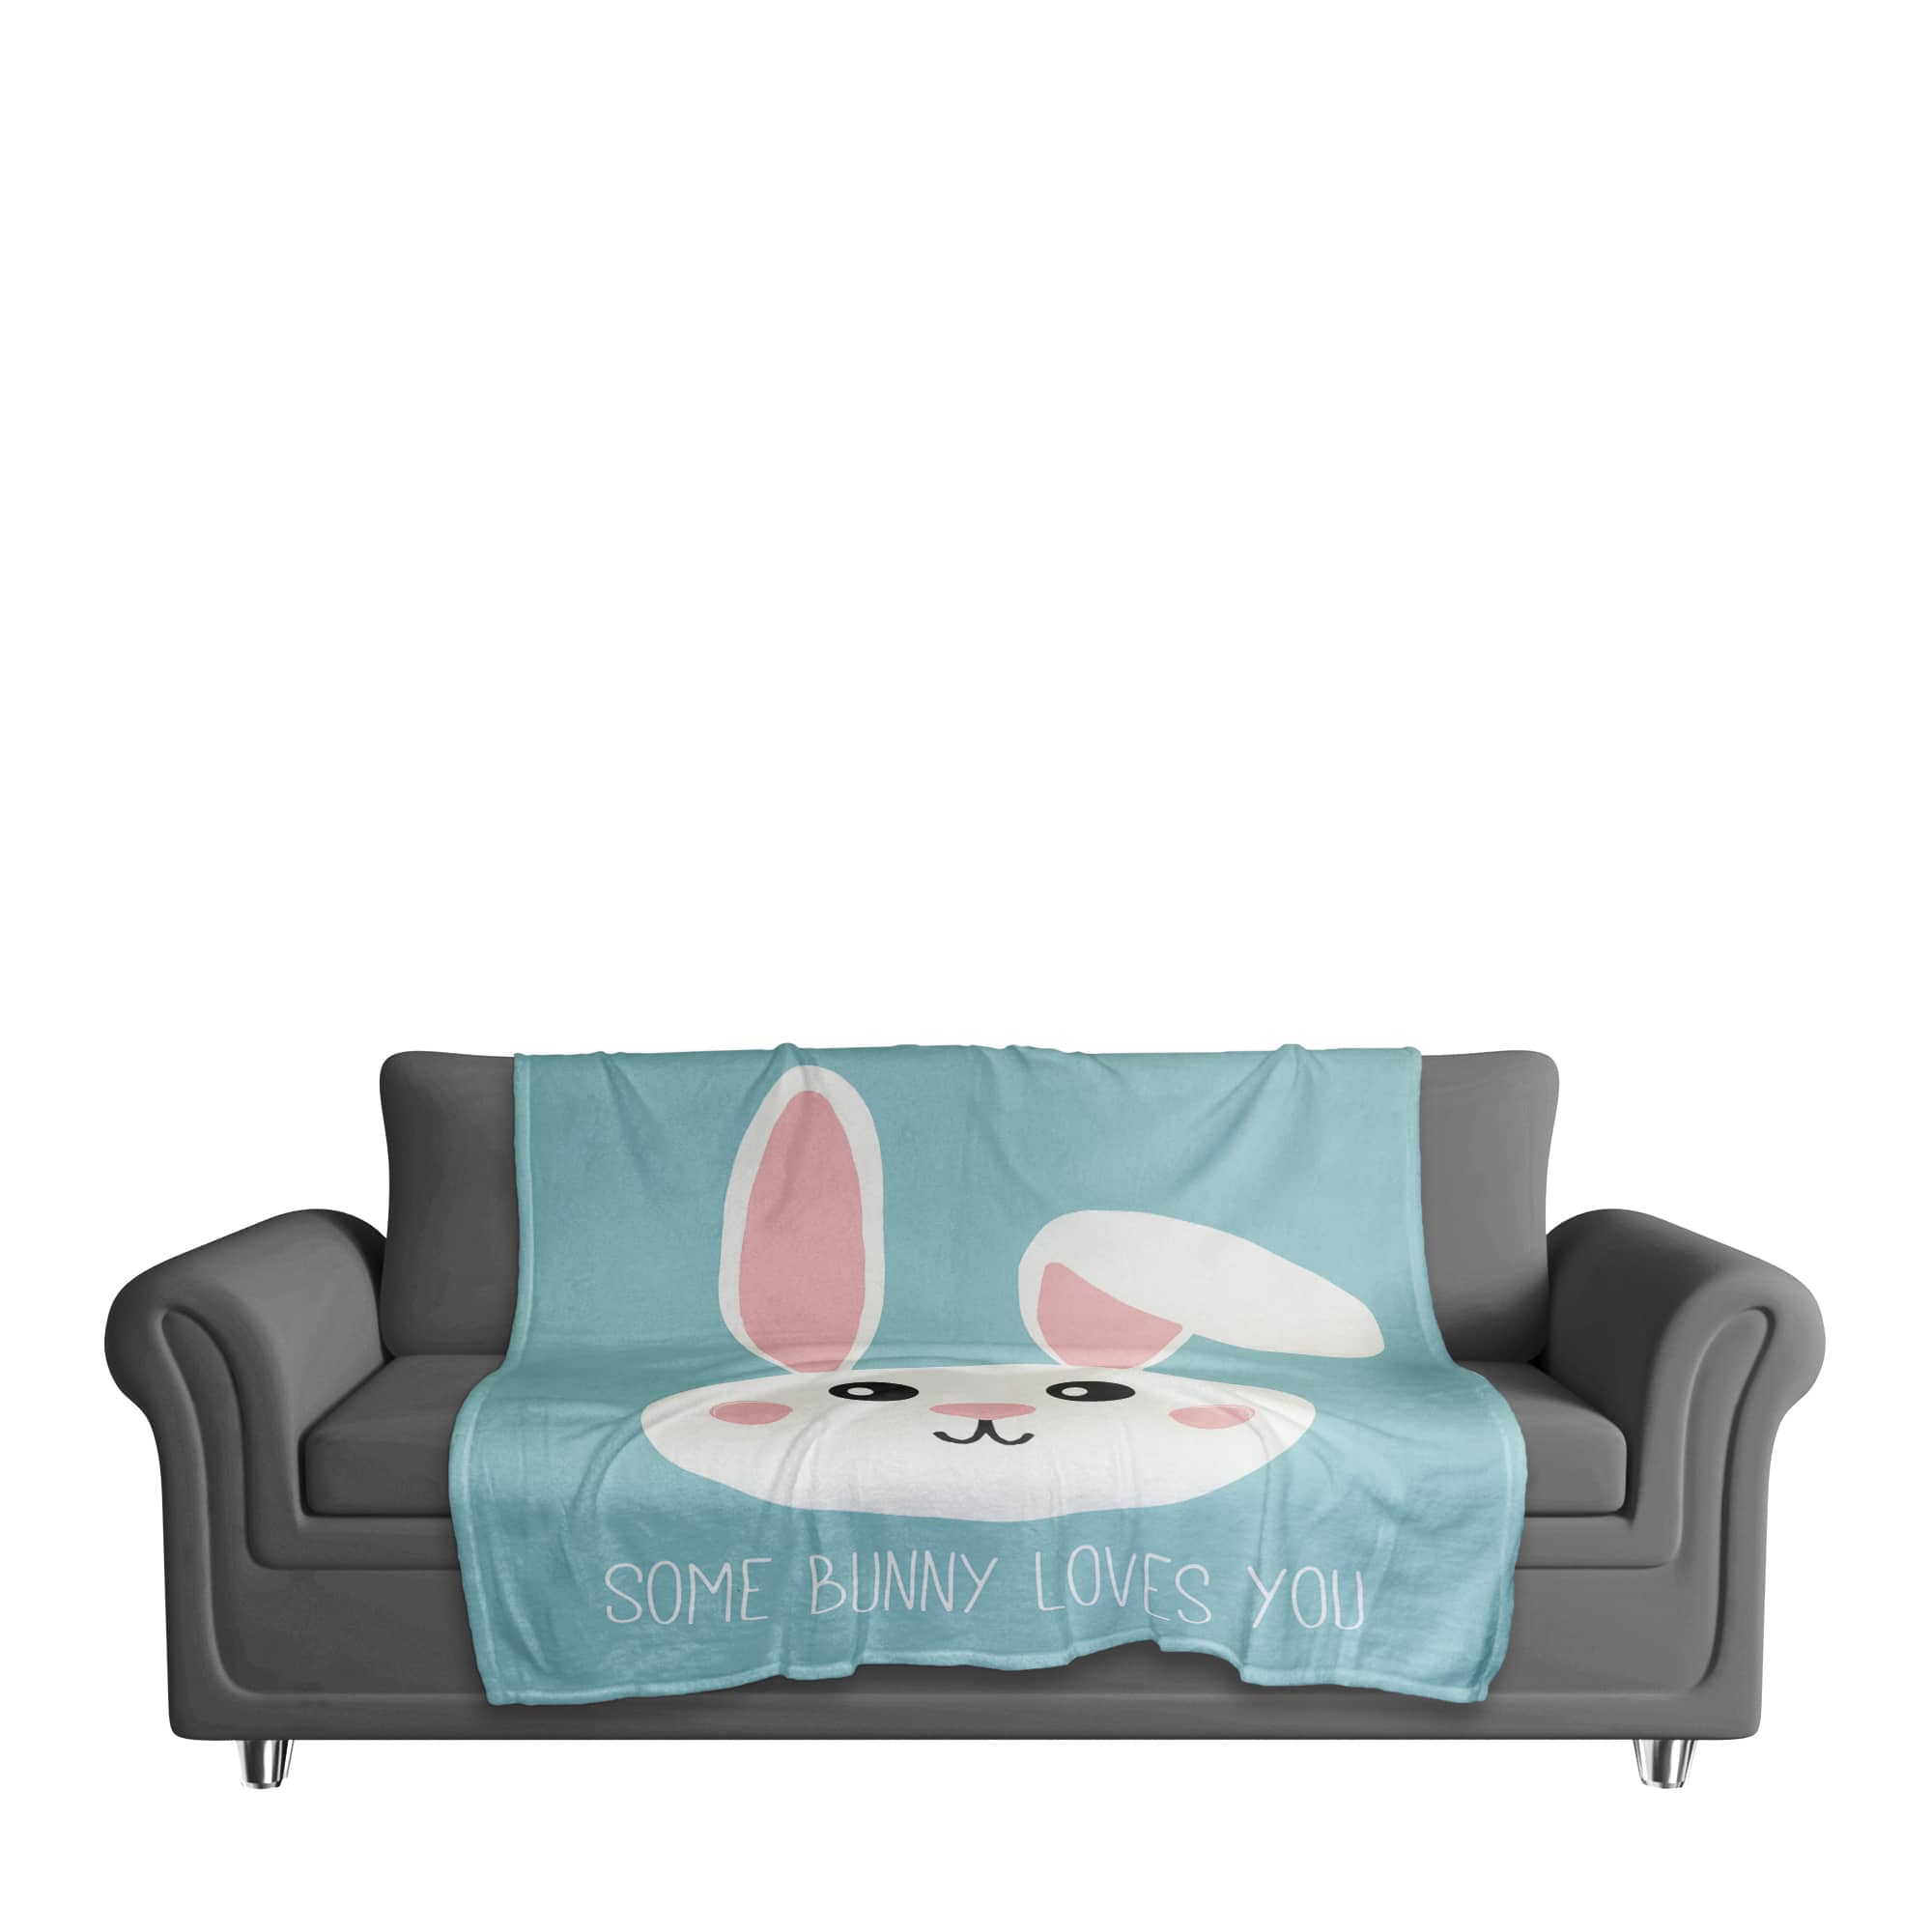 Some Bunny Loves You Teal Throw Blanket